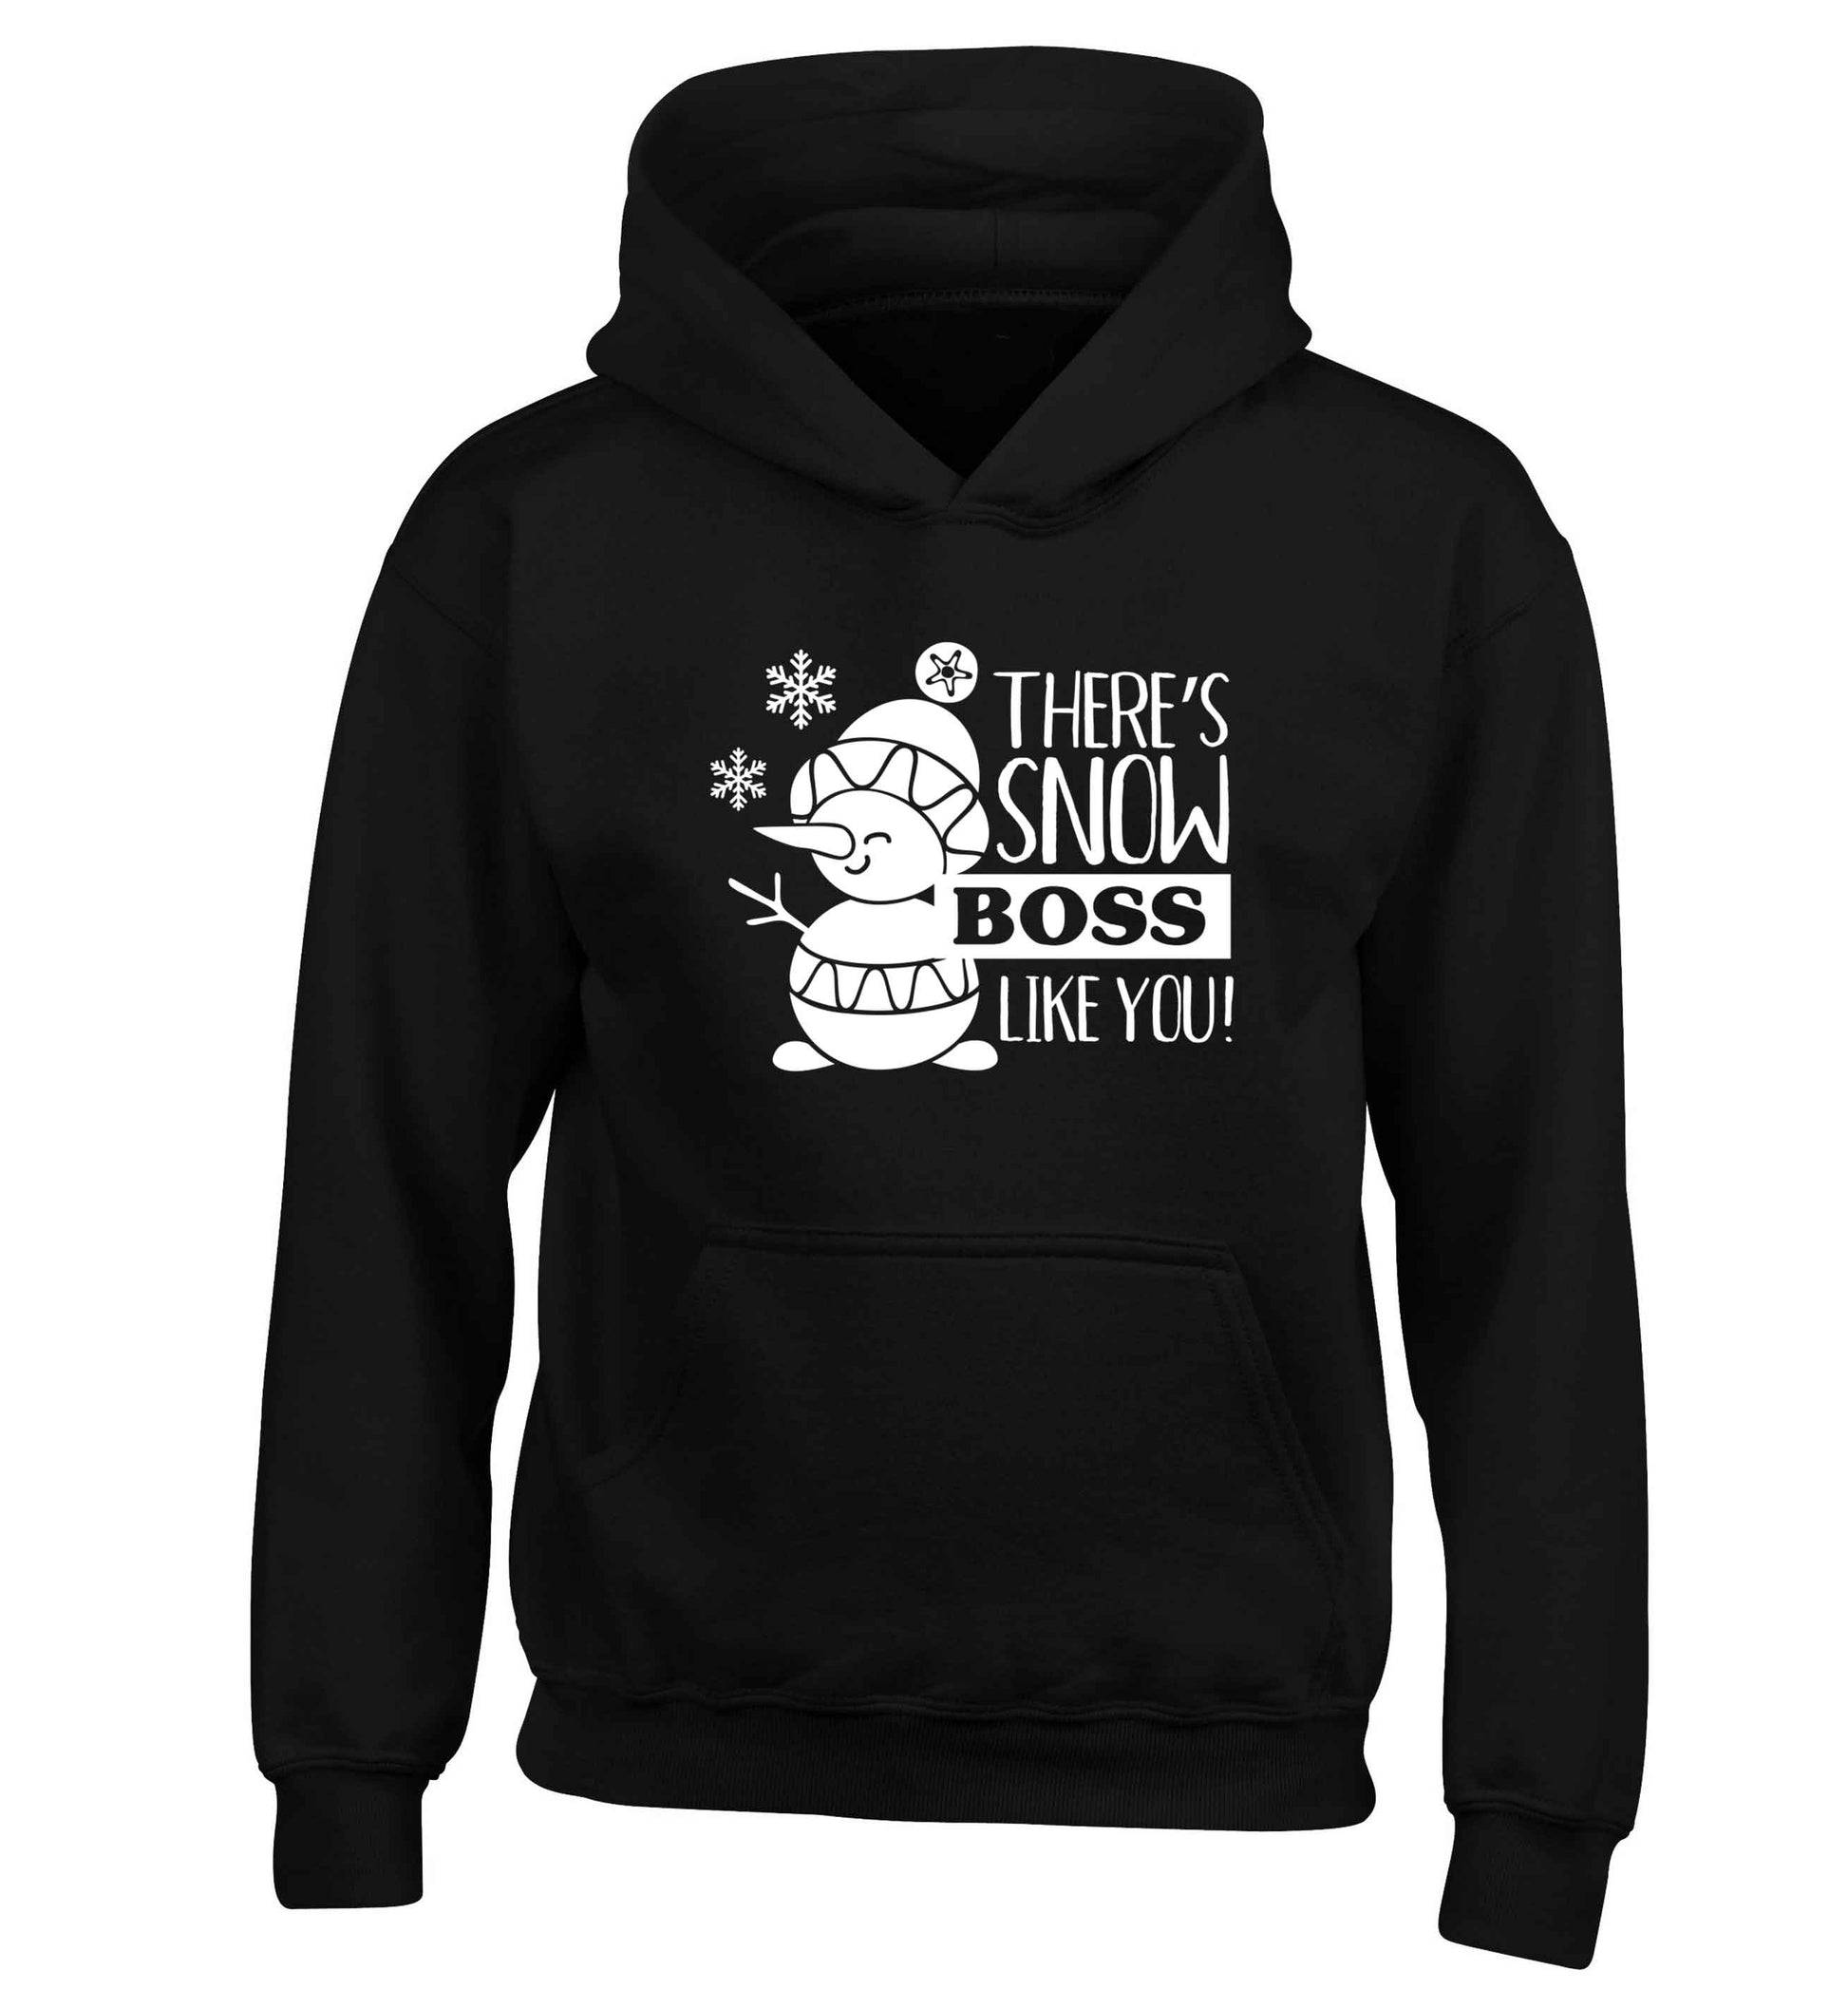 There's snow boss like you children's black hoodie 12-13 Years